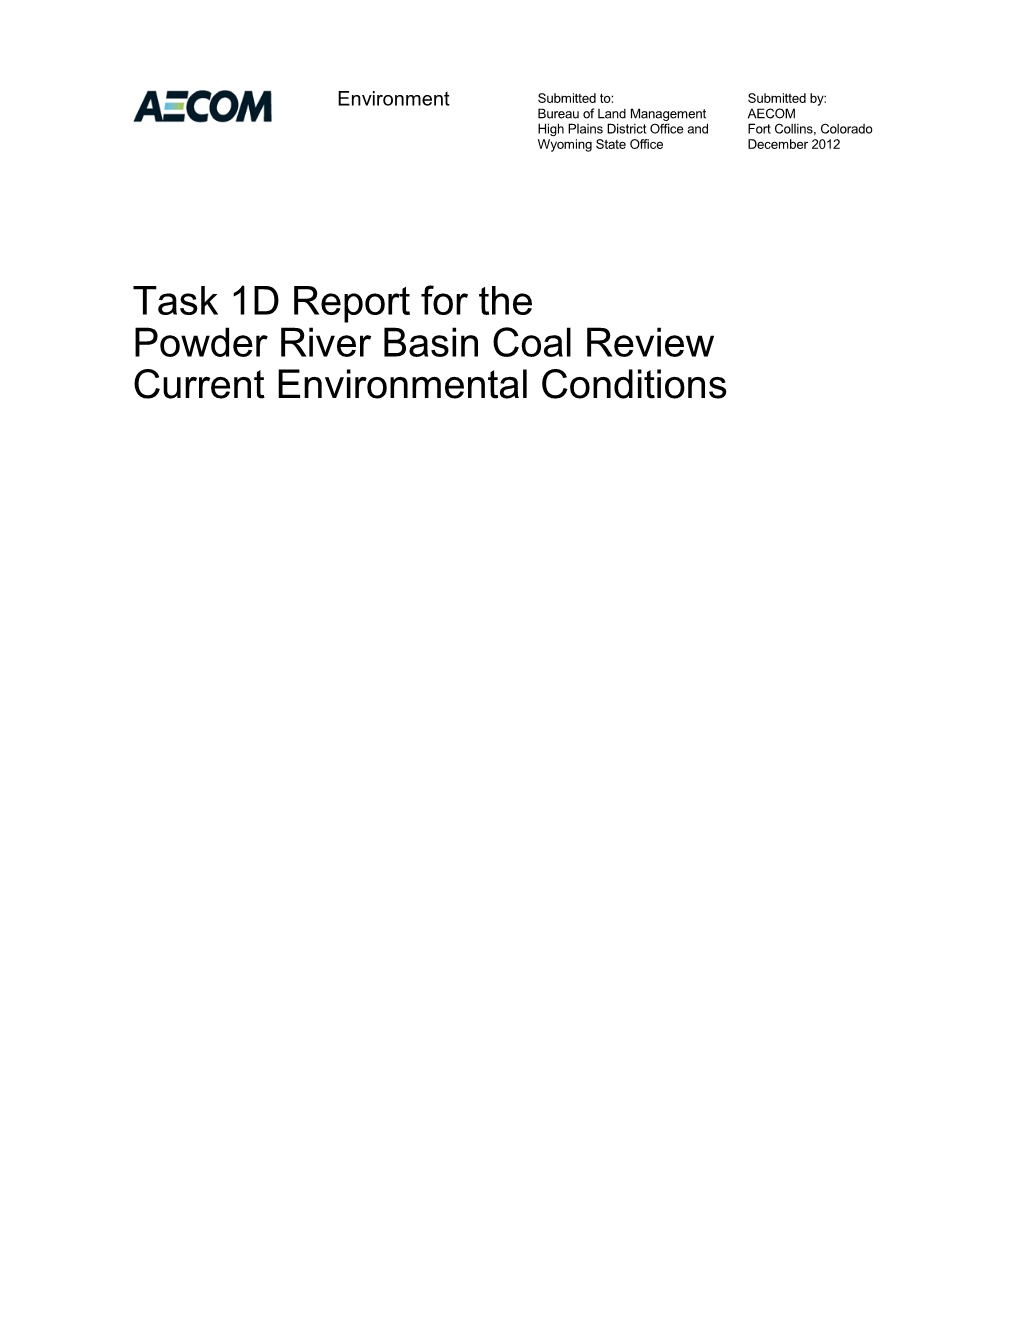 Task 1D Report for the Powder River Basin Coal Review Current Environmental Conditions